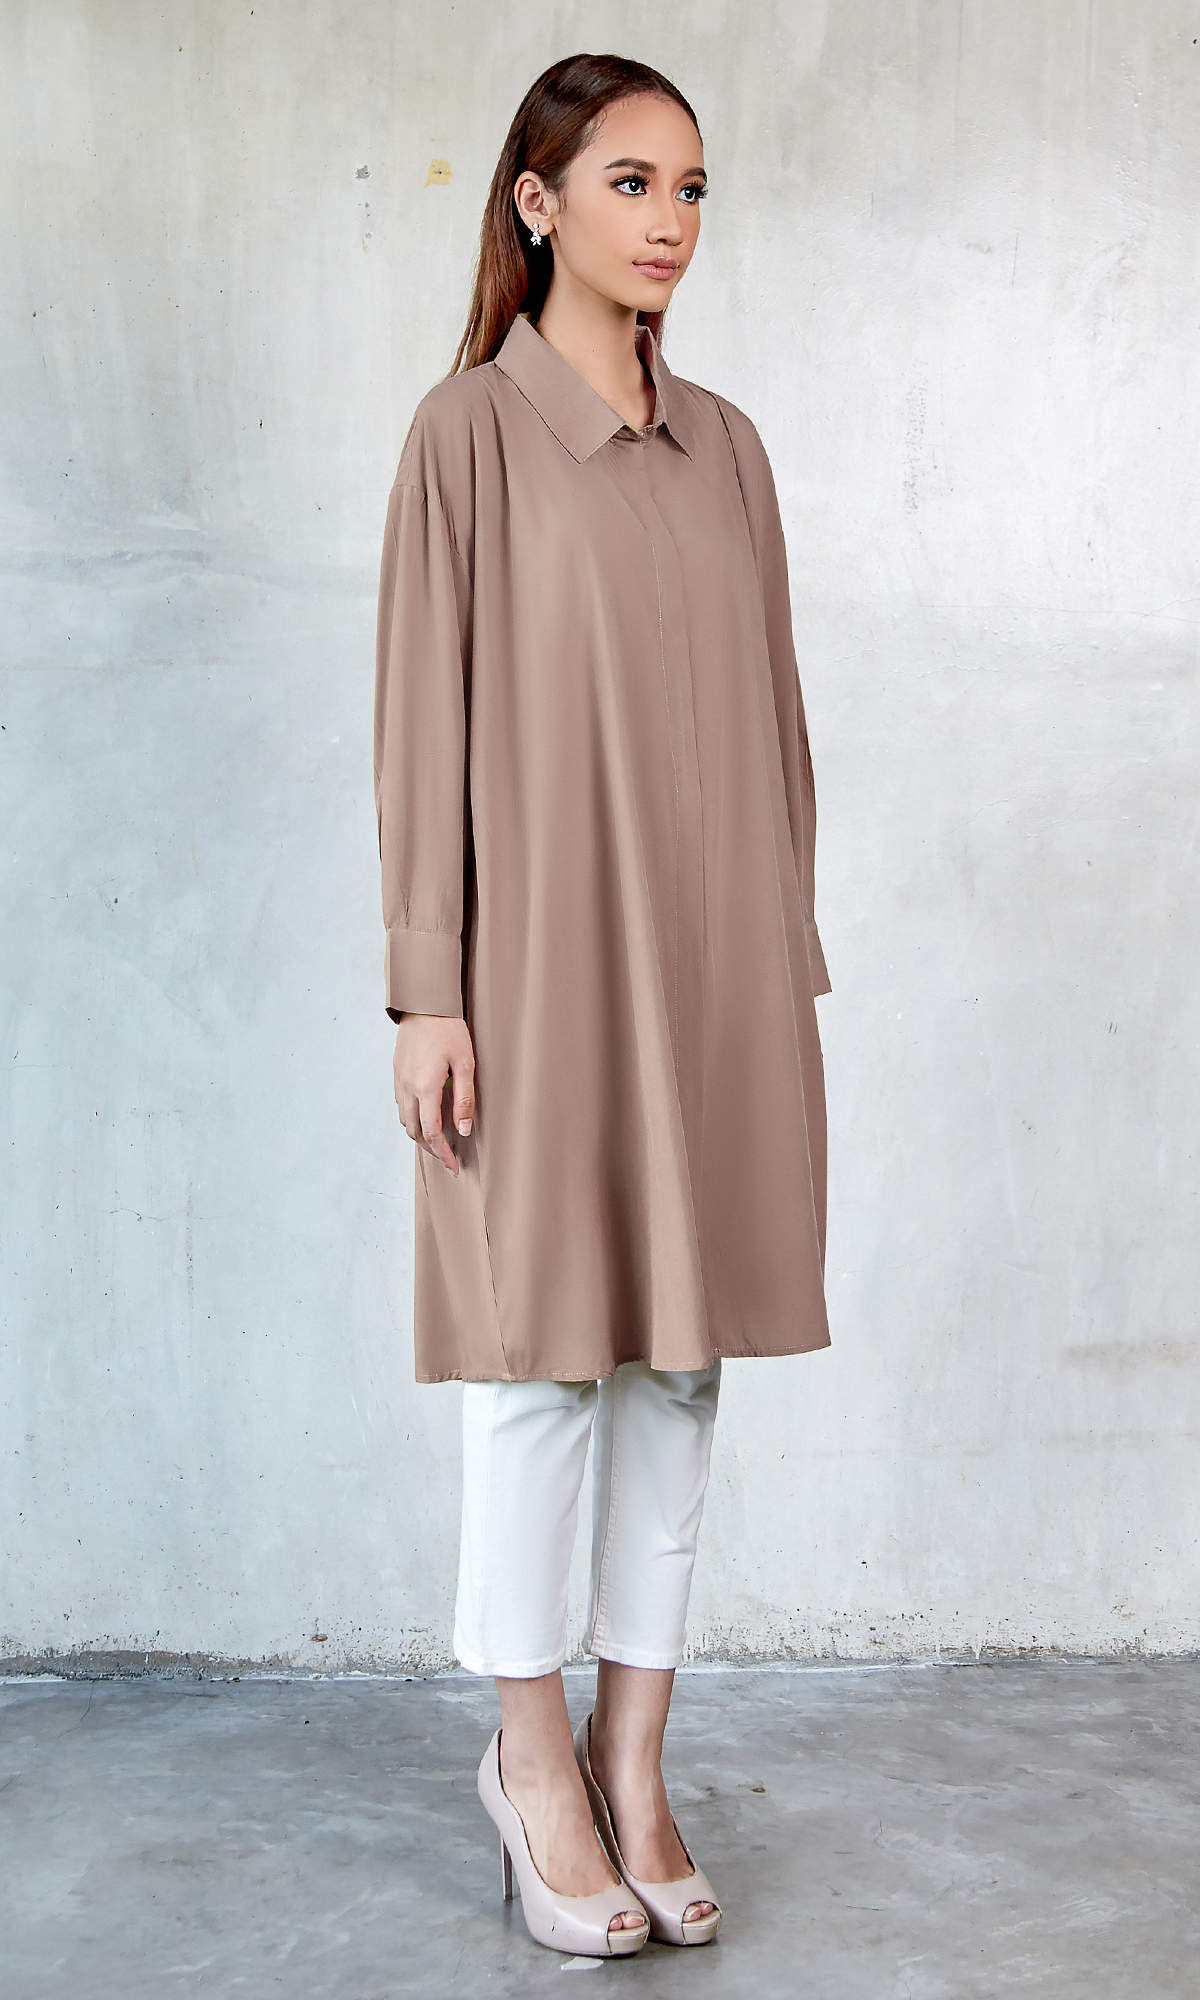 Calista Blouse in Brown